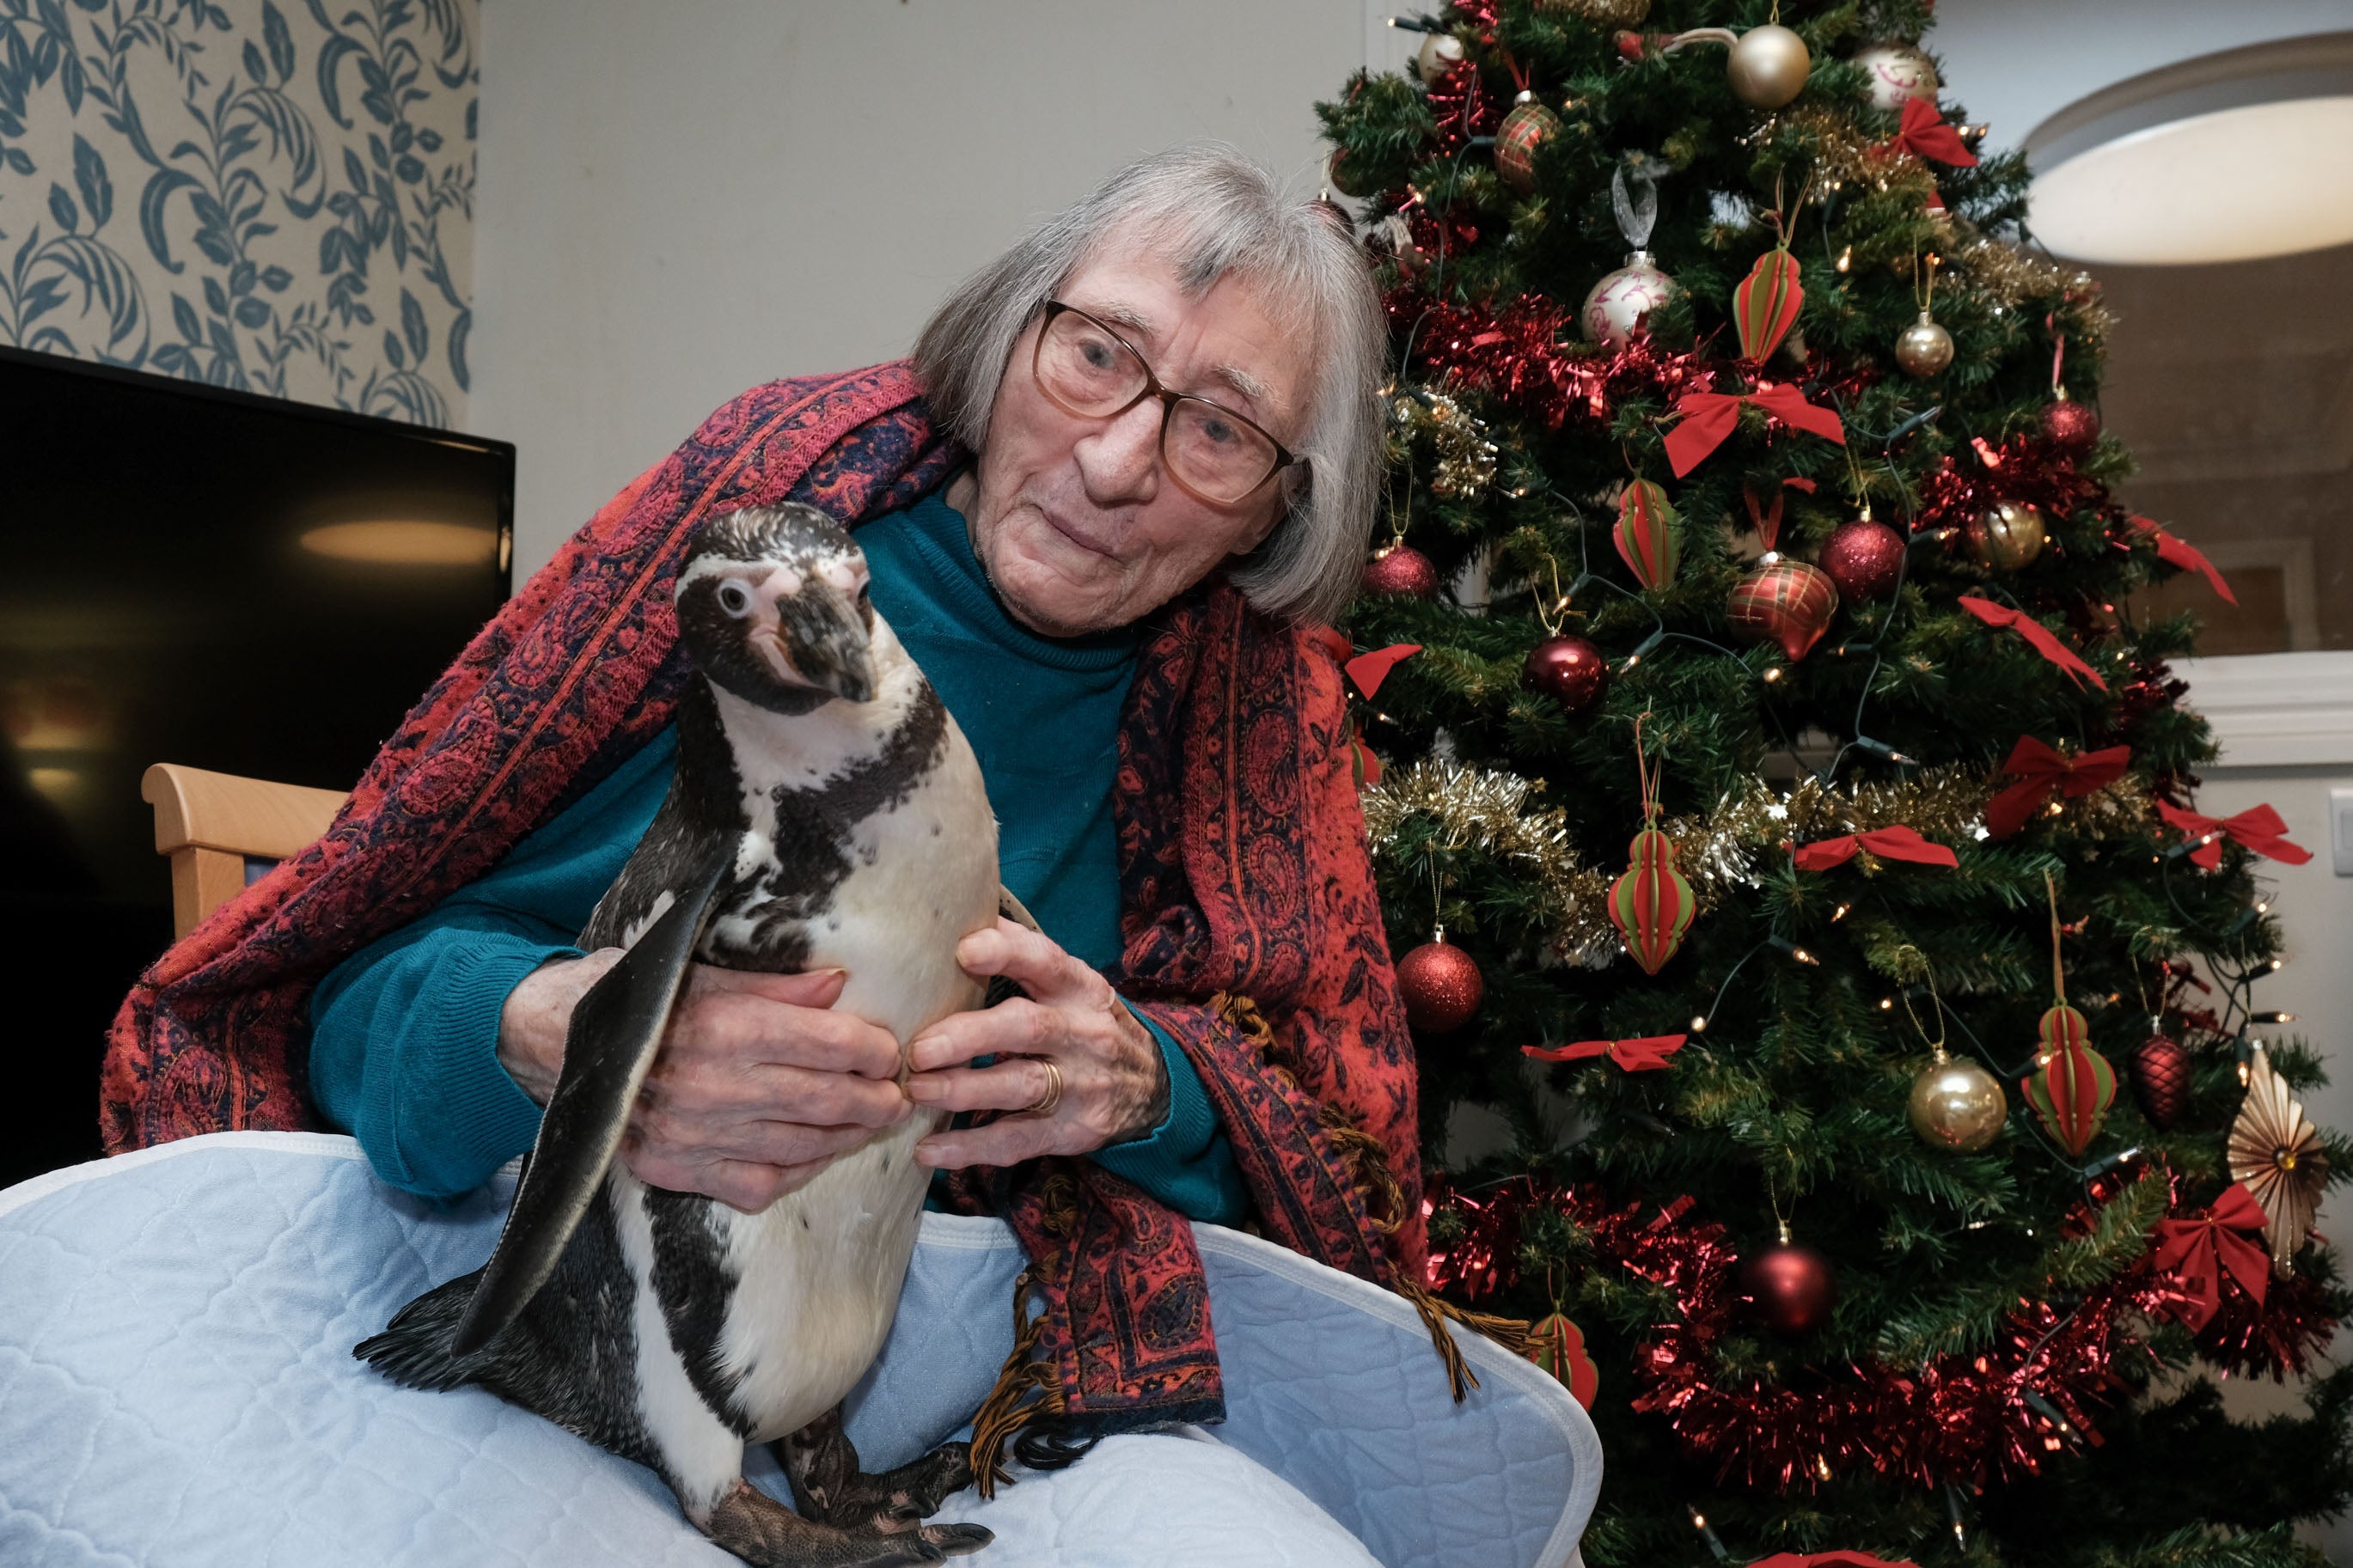 Resident Joyce Drewitt, 98, p-p-p-picked up a Humboldt penguin that visited the Orders of Saint John Care Trust’s Spencer Court care home in Oxfordshire (Orders of Saint John Care Trust/PA)